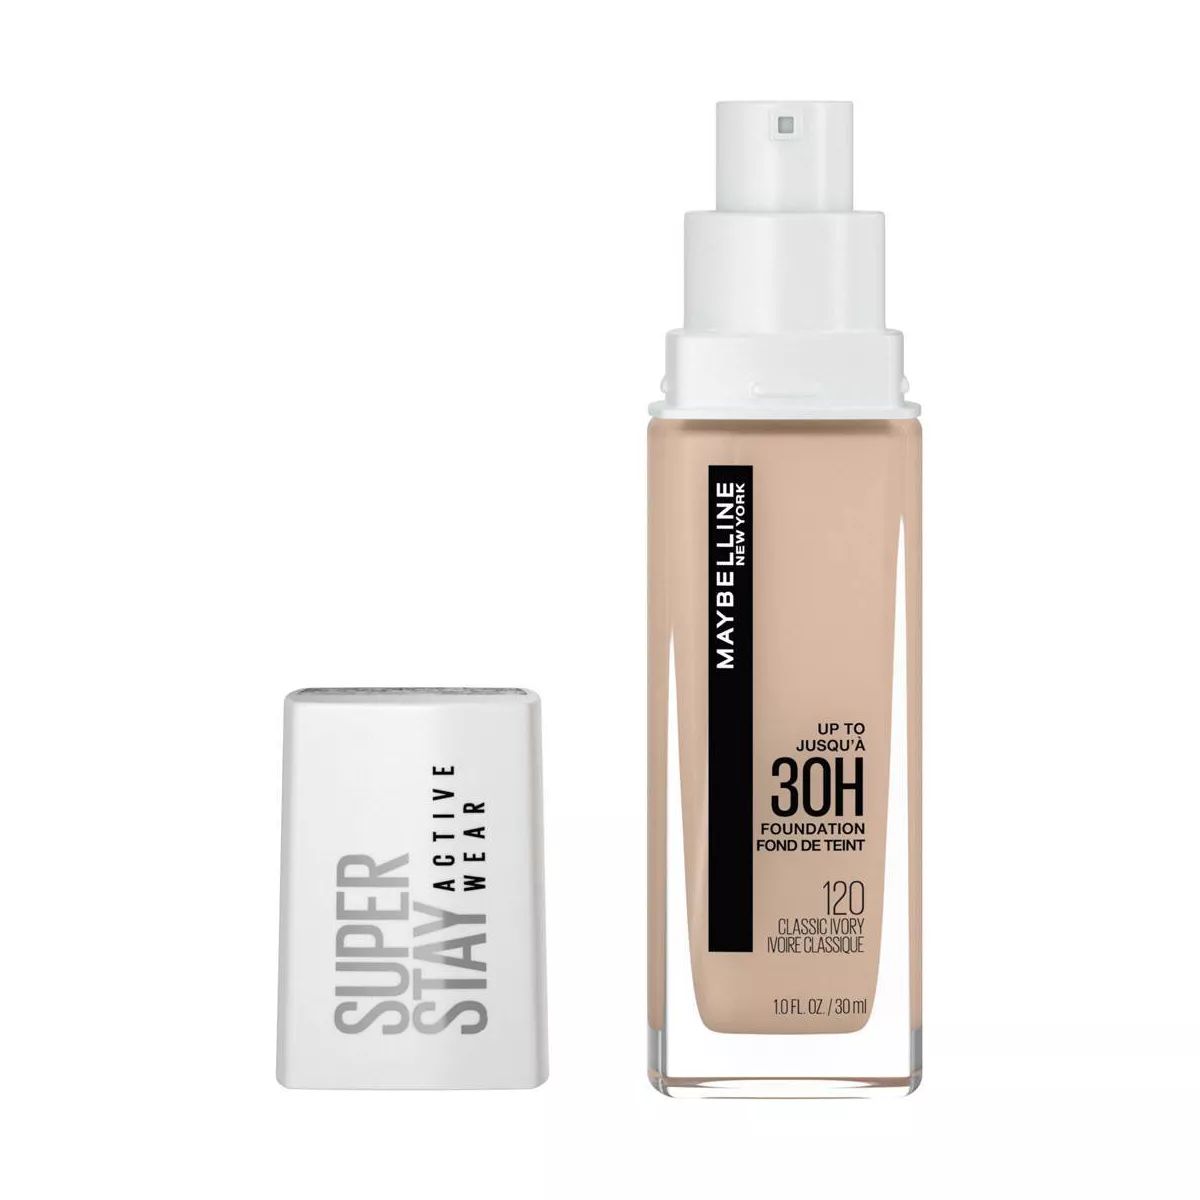 Maybelline Super Stay Full Coverage Liquid Foundation - 120 Classic Ivory - 1 fl oz | Target